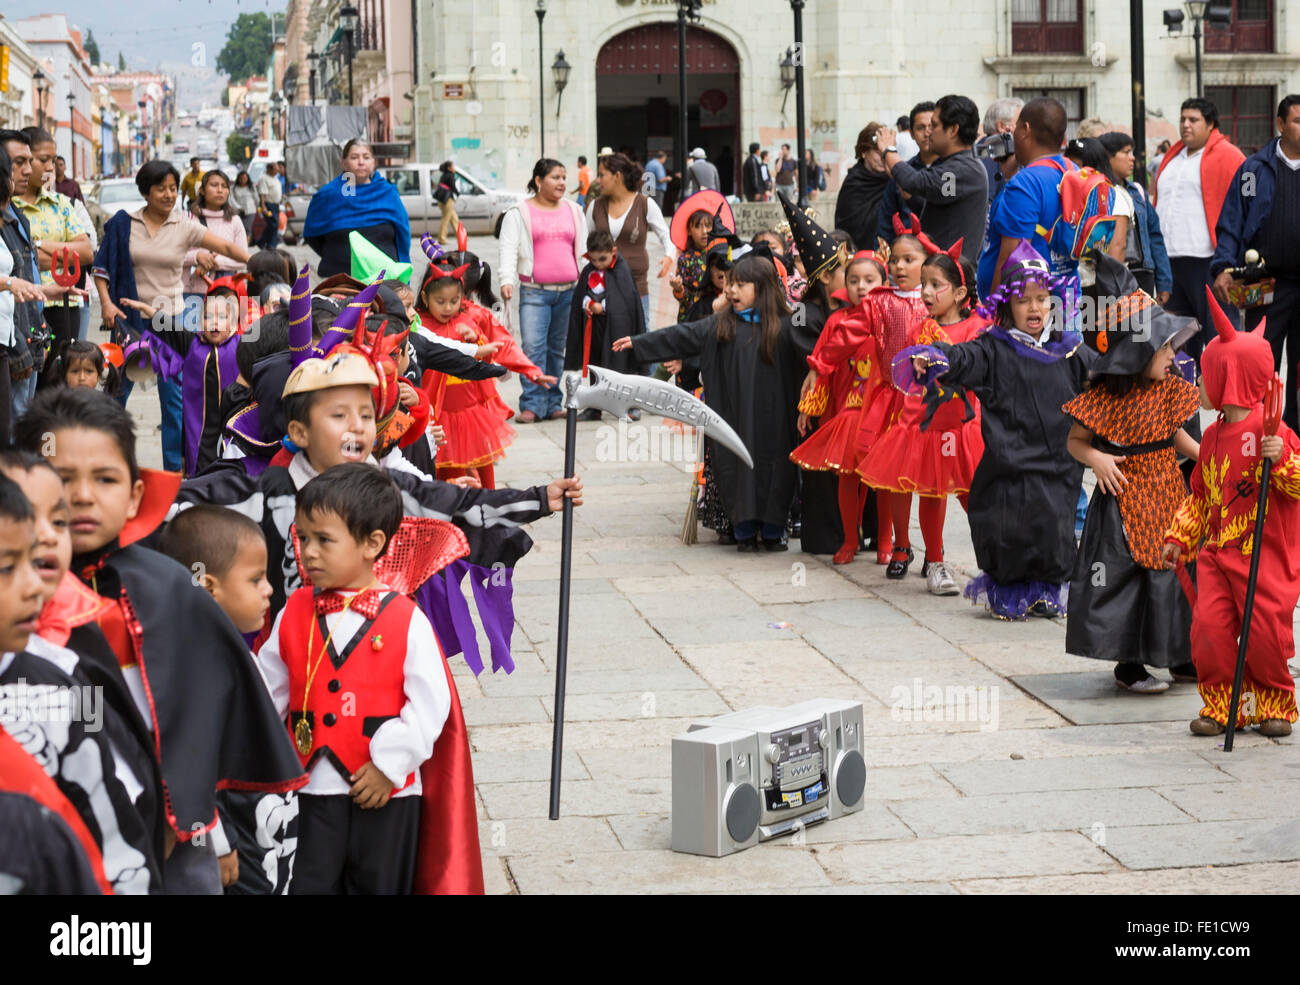 Children in costumes dancing and marching to music playing from a boom box in a Halloween parade, Oaxaca City, Oaxaca, Mexico Stock Photo